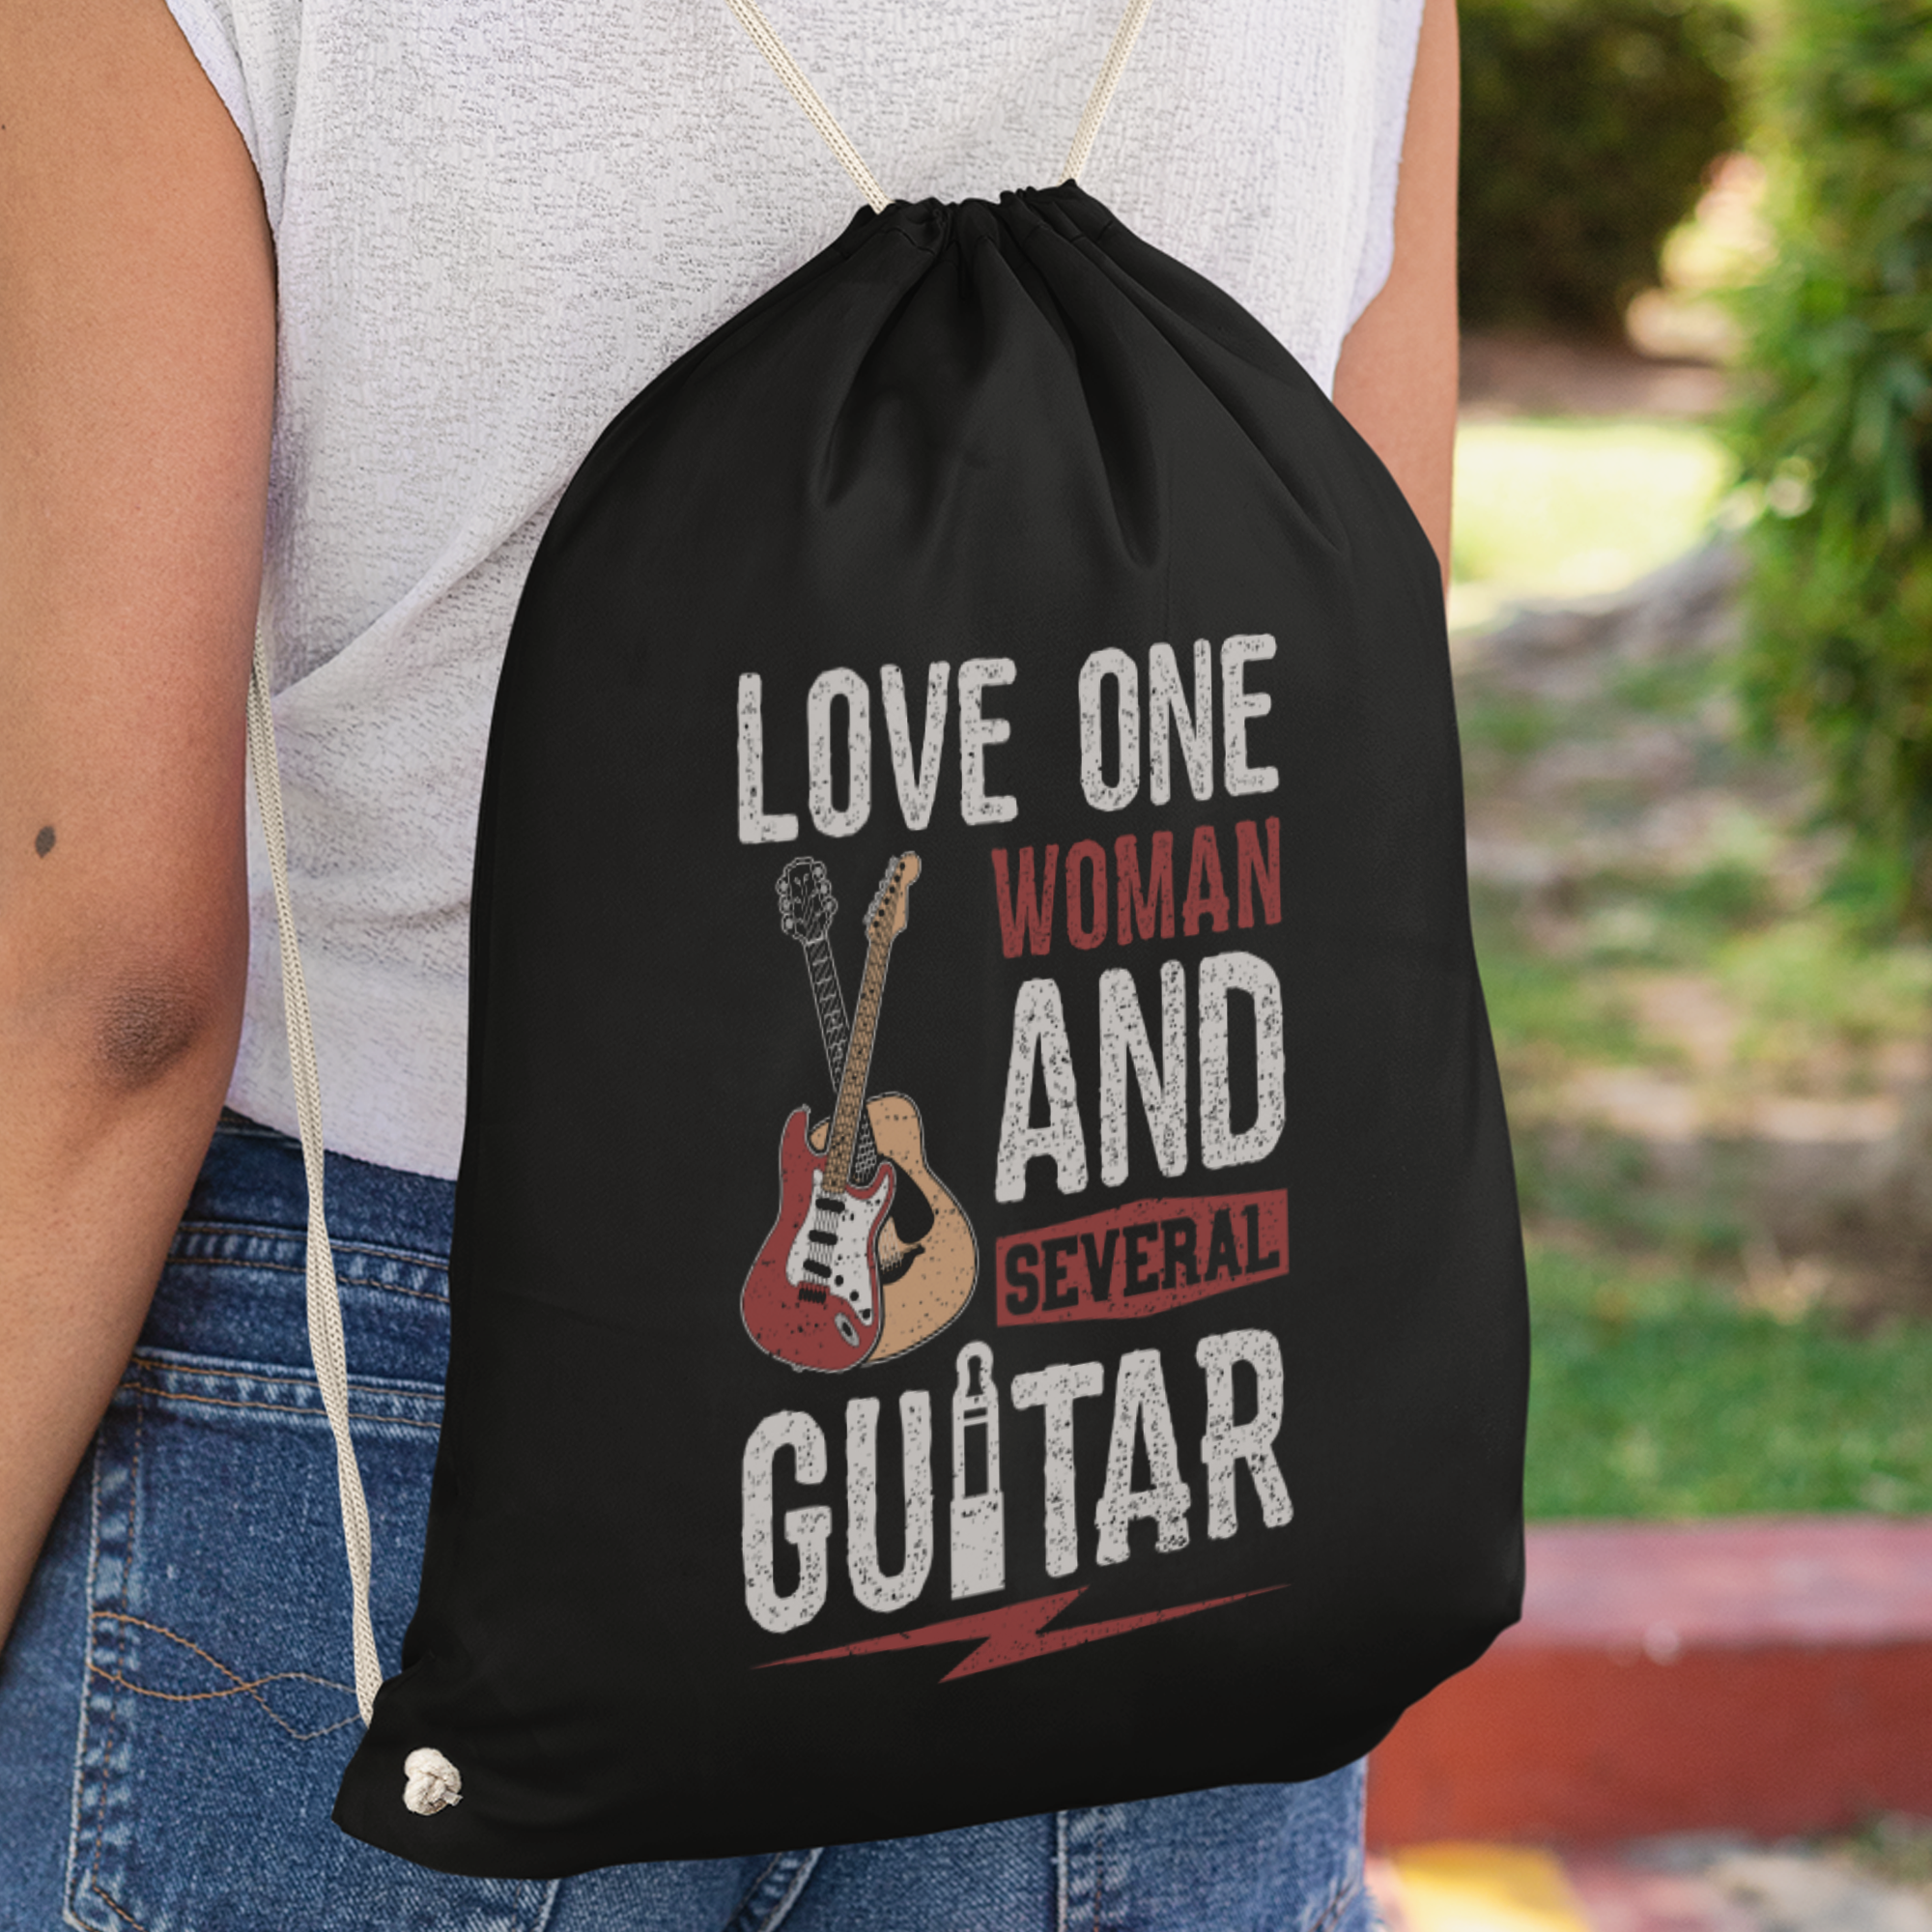 Love One Woman And Several Guitars Turnbeutel - DESIGNSBYJNK5.COM